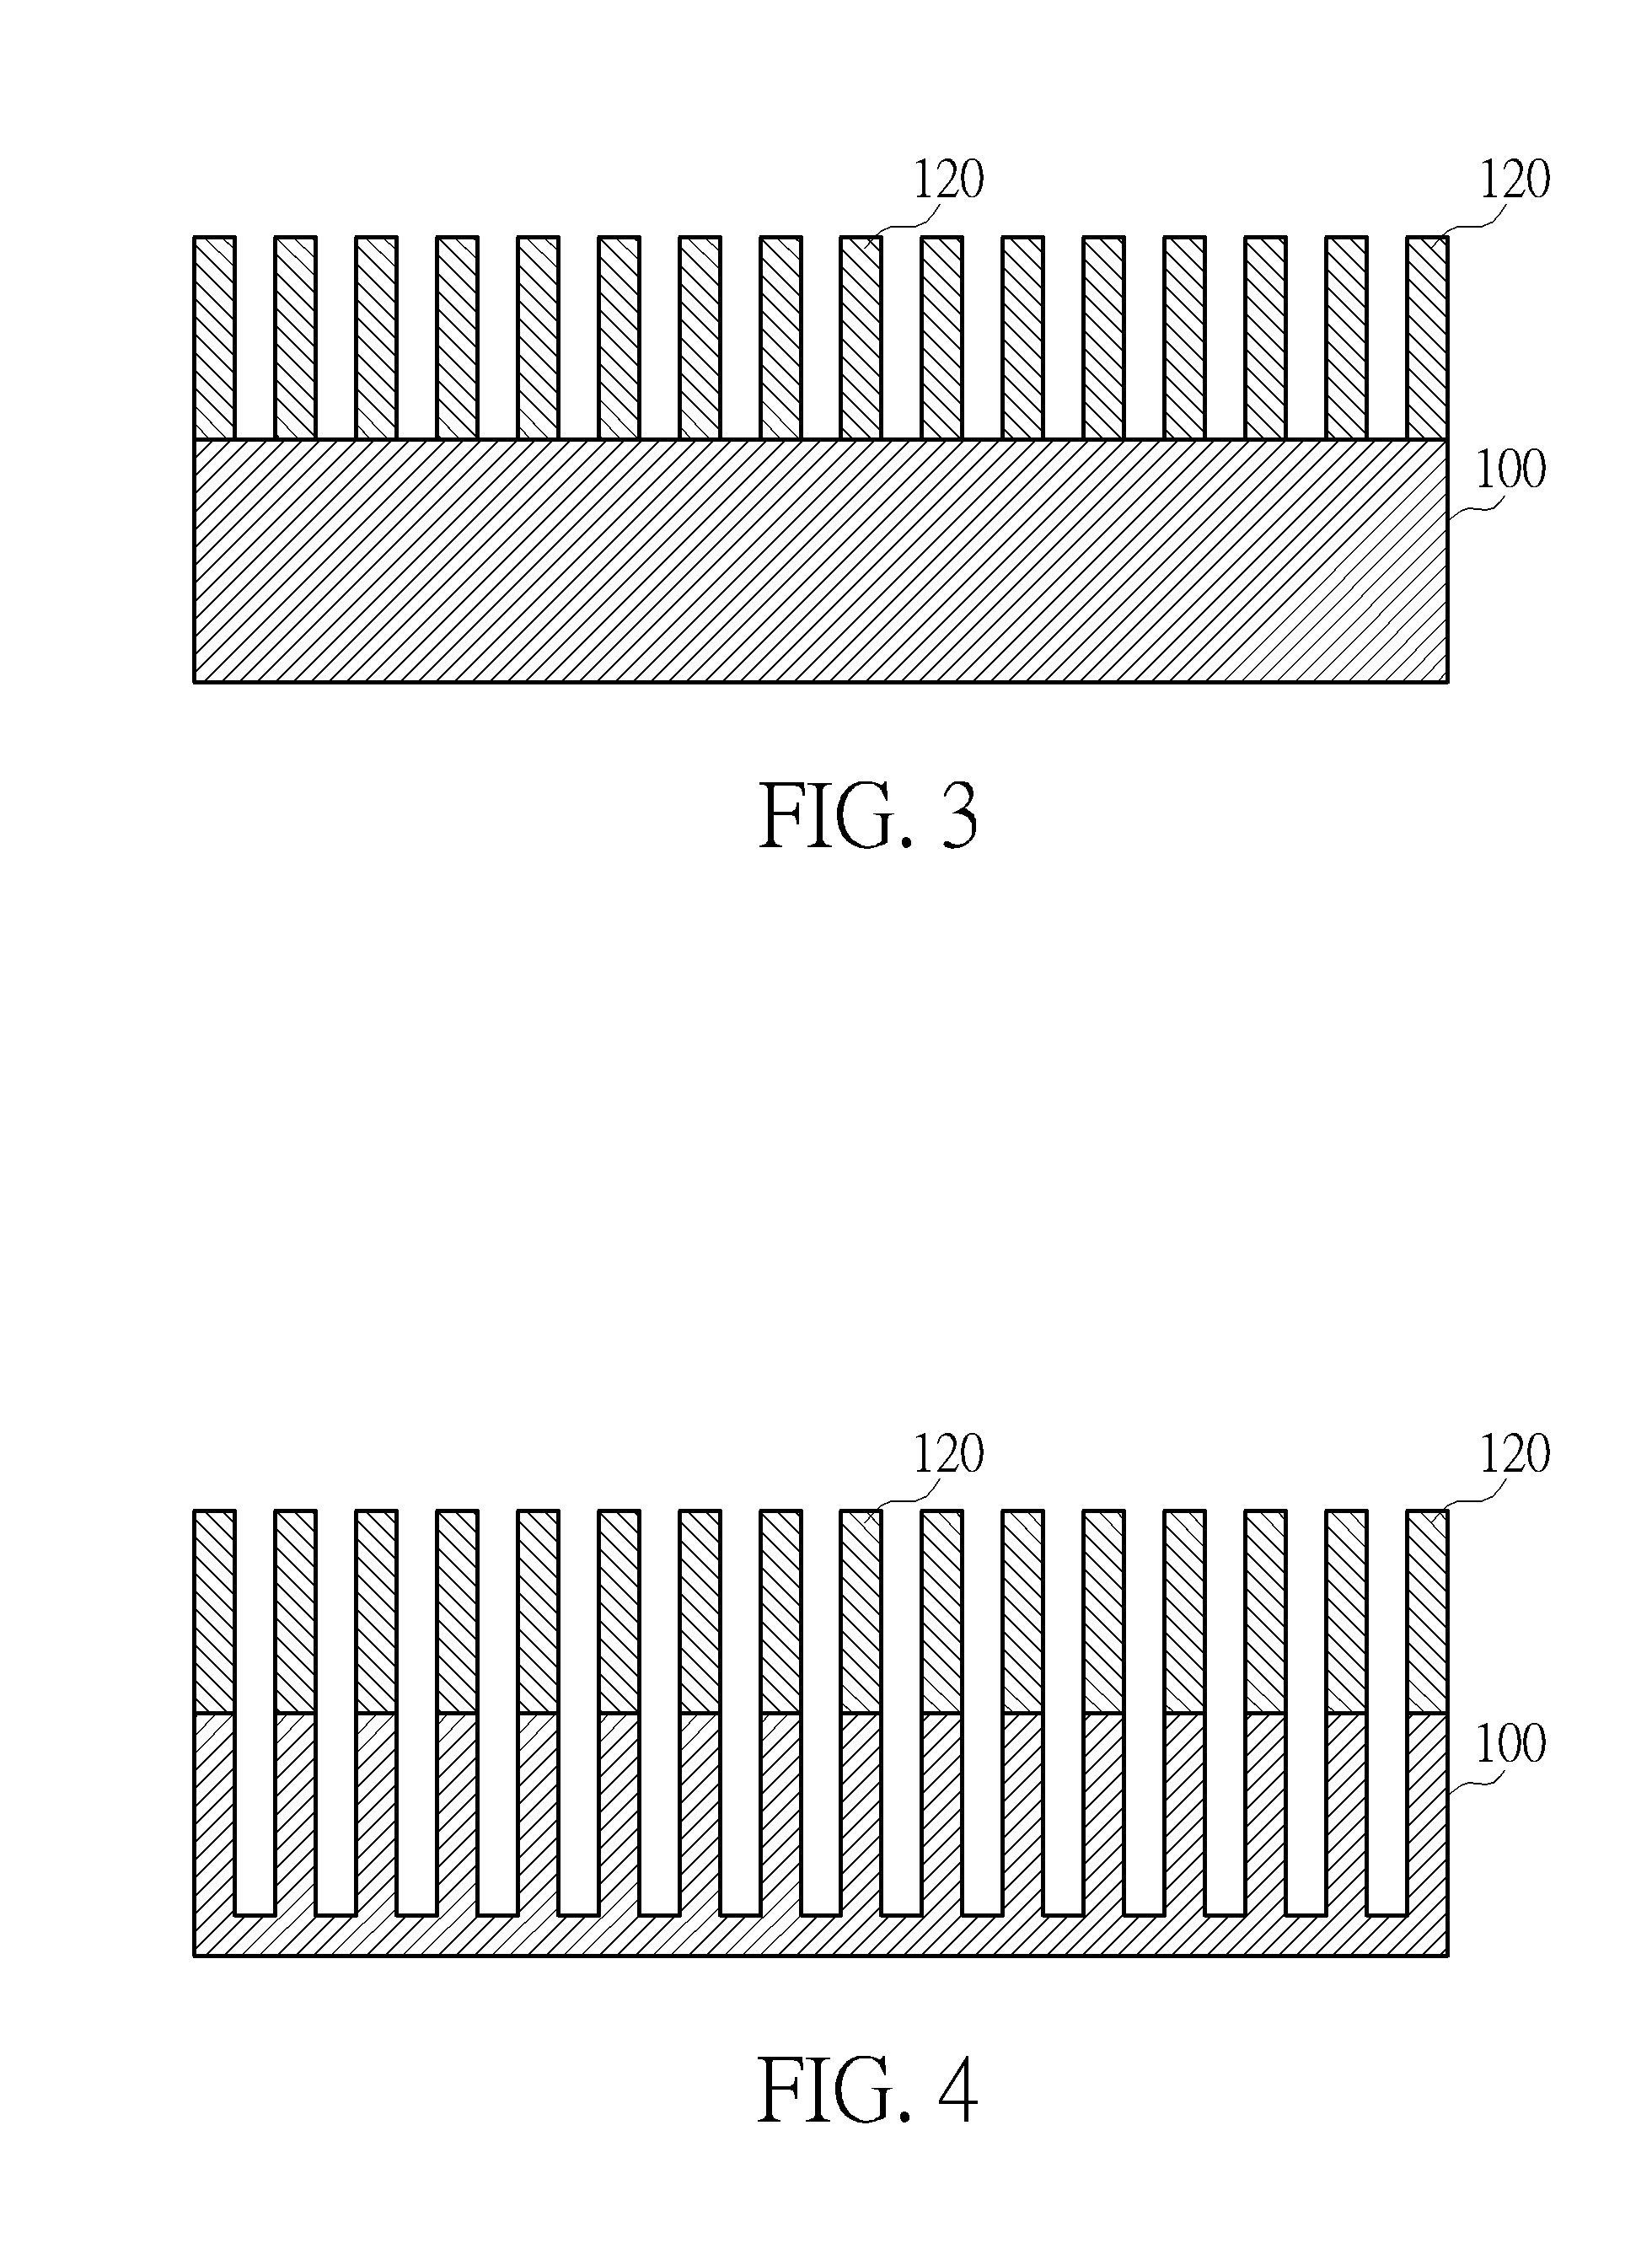 Overlay marks and semiconductor process using the overlay marks